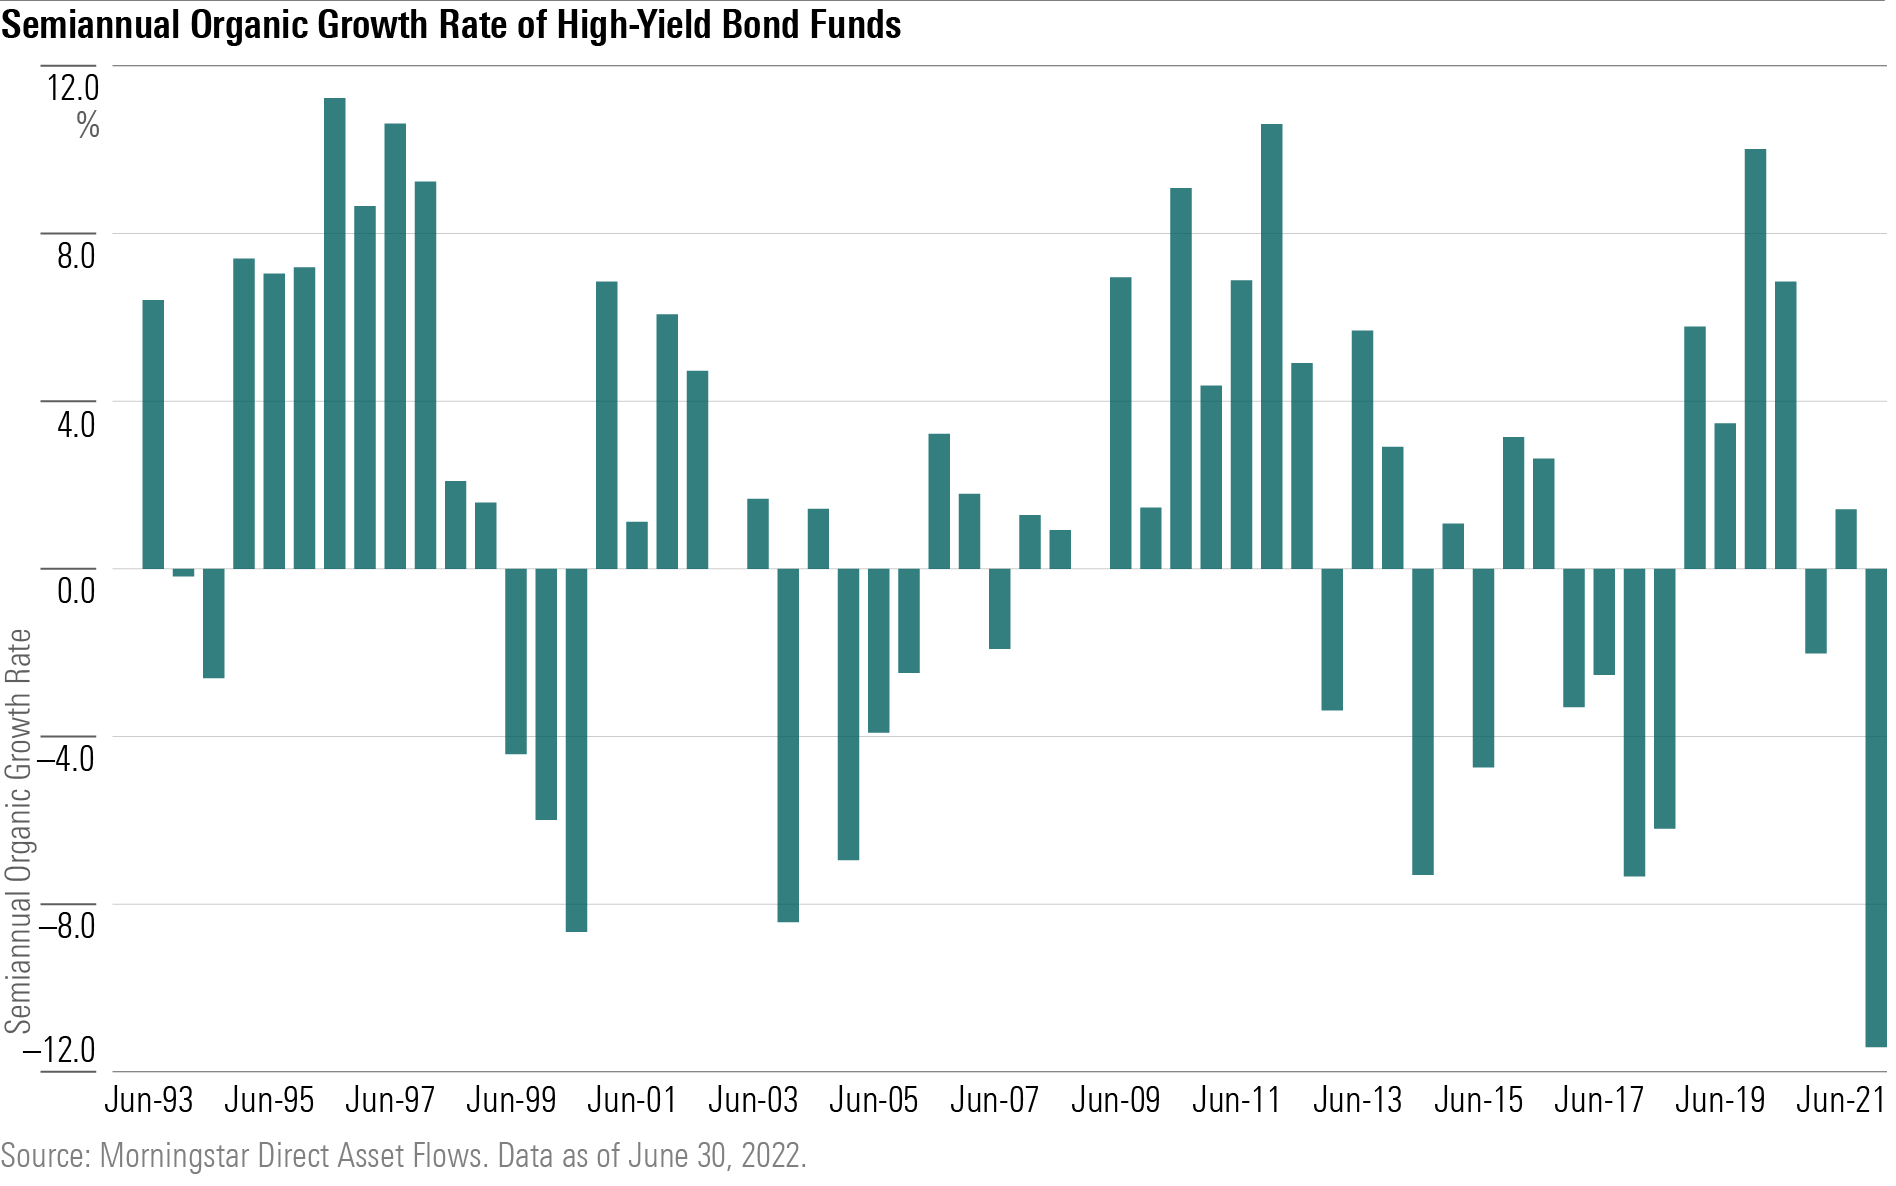 A bar chart of the semiannaual growth rates for high-yield bond funds since June 1993.